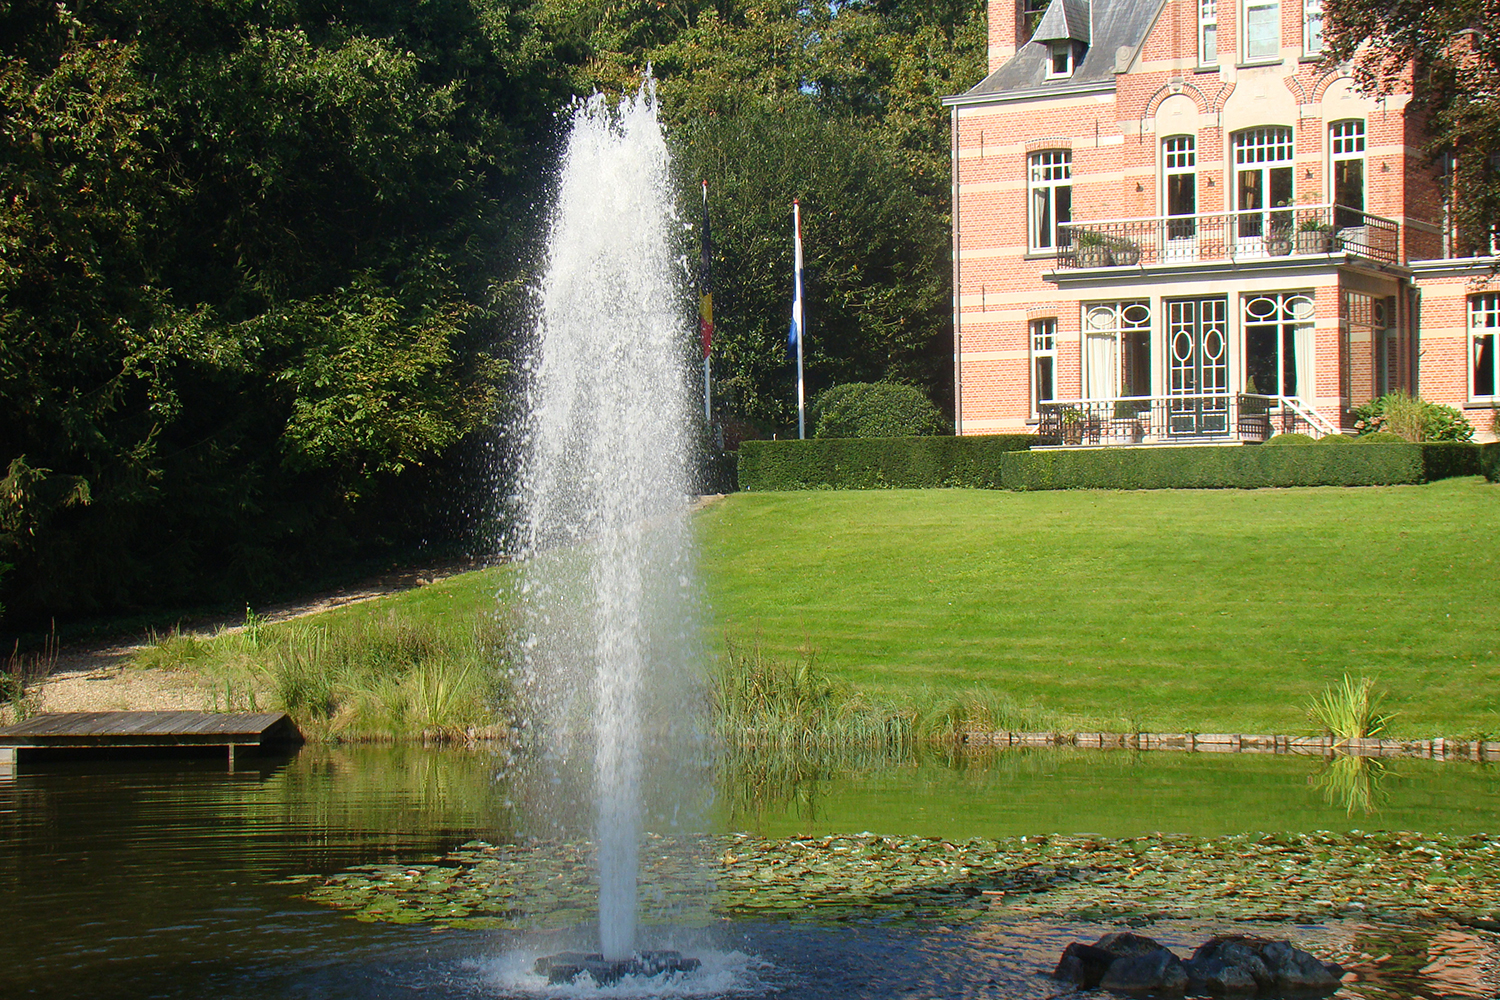 One of Otterbine's Comet Aerating Fountains in a small pond